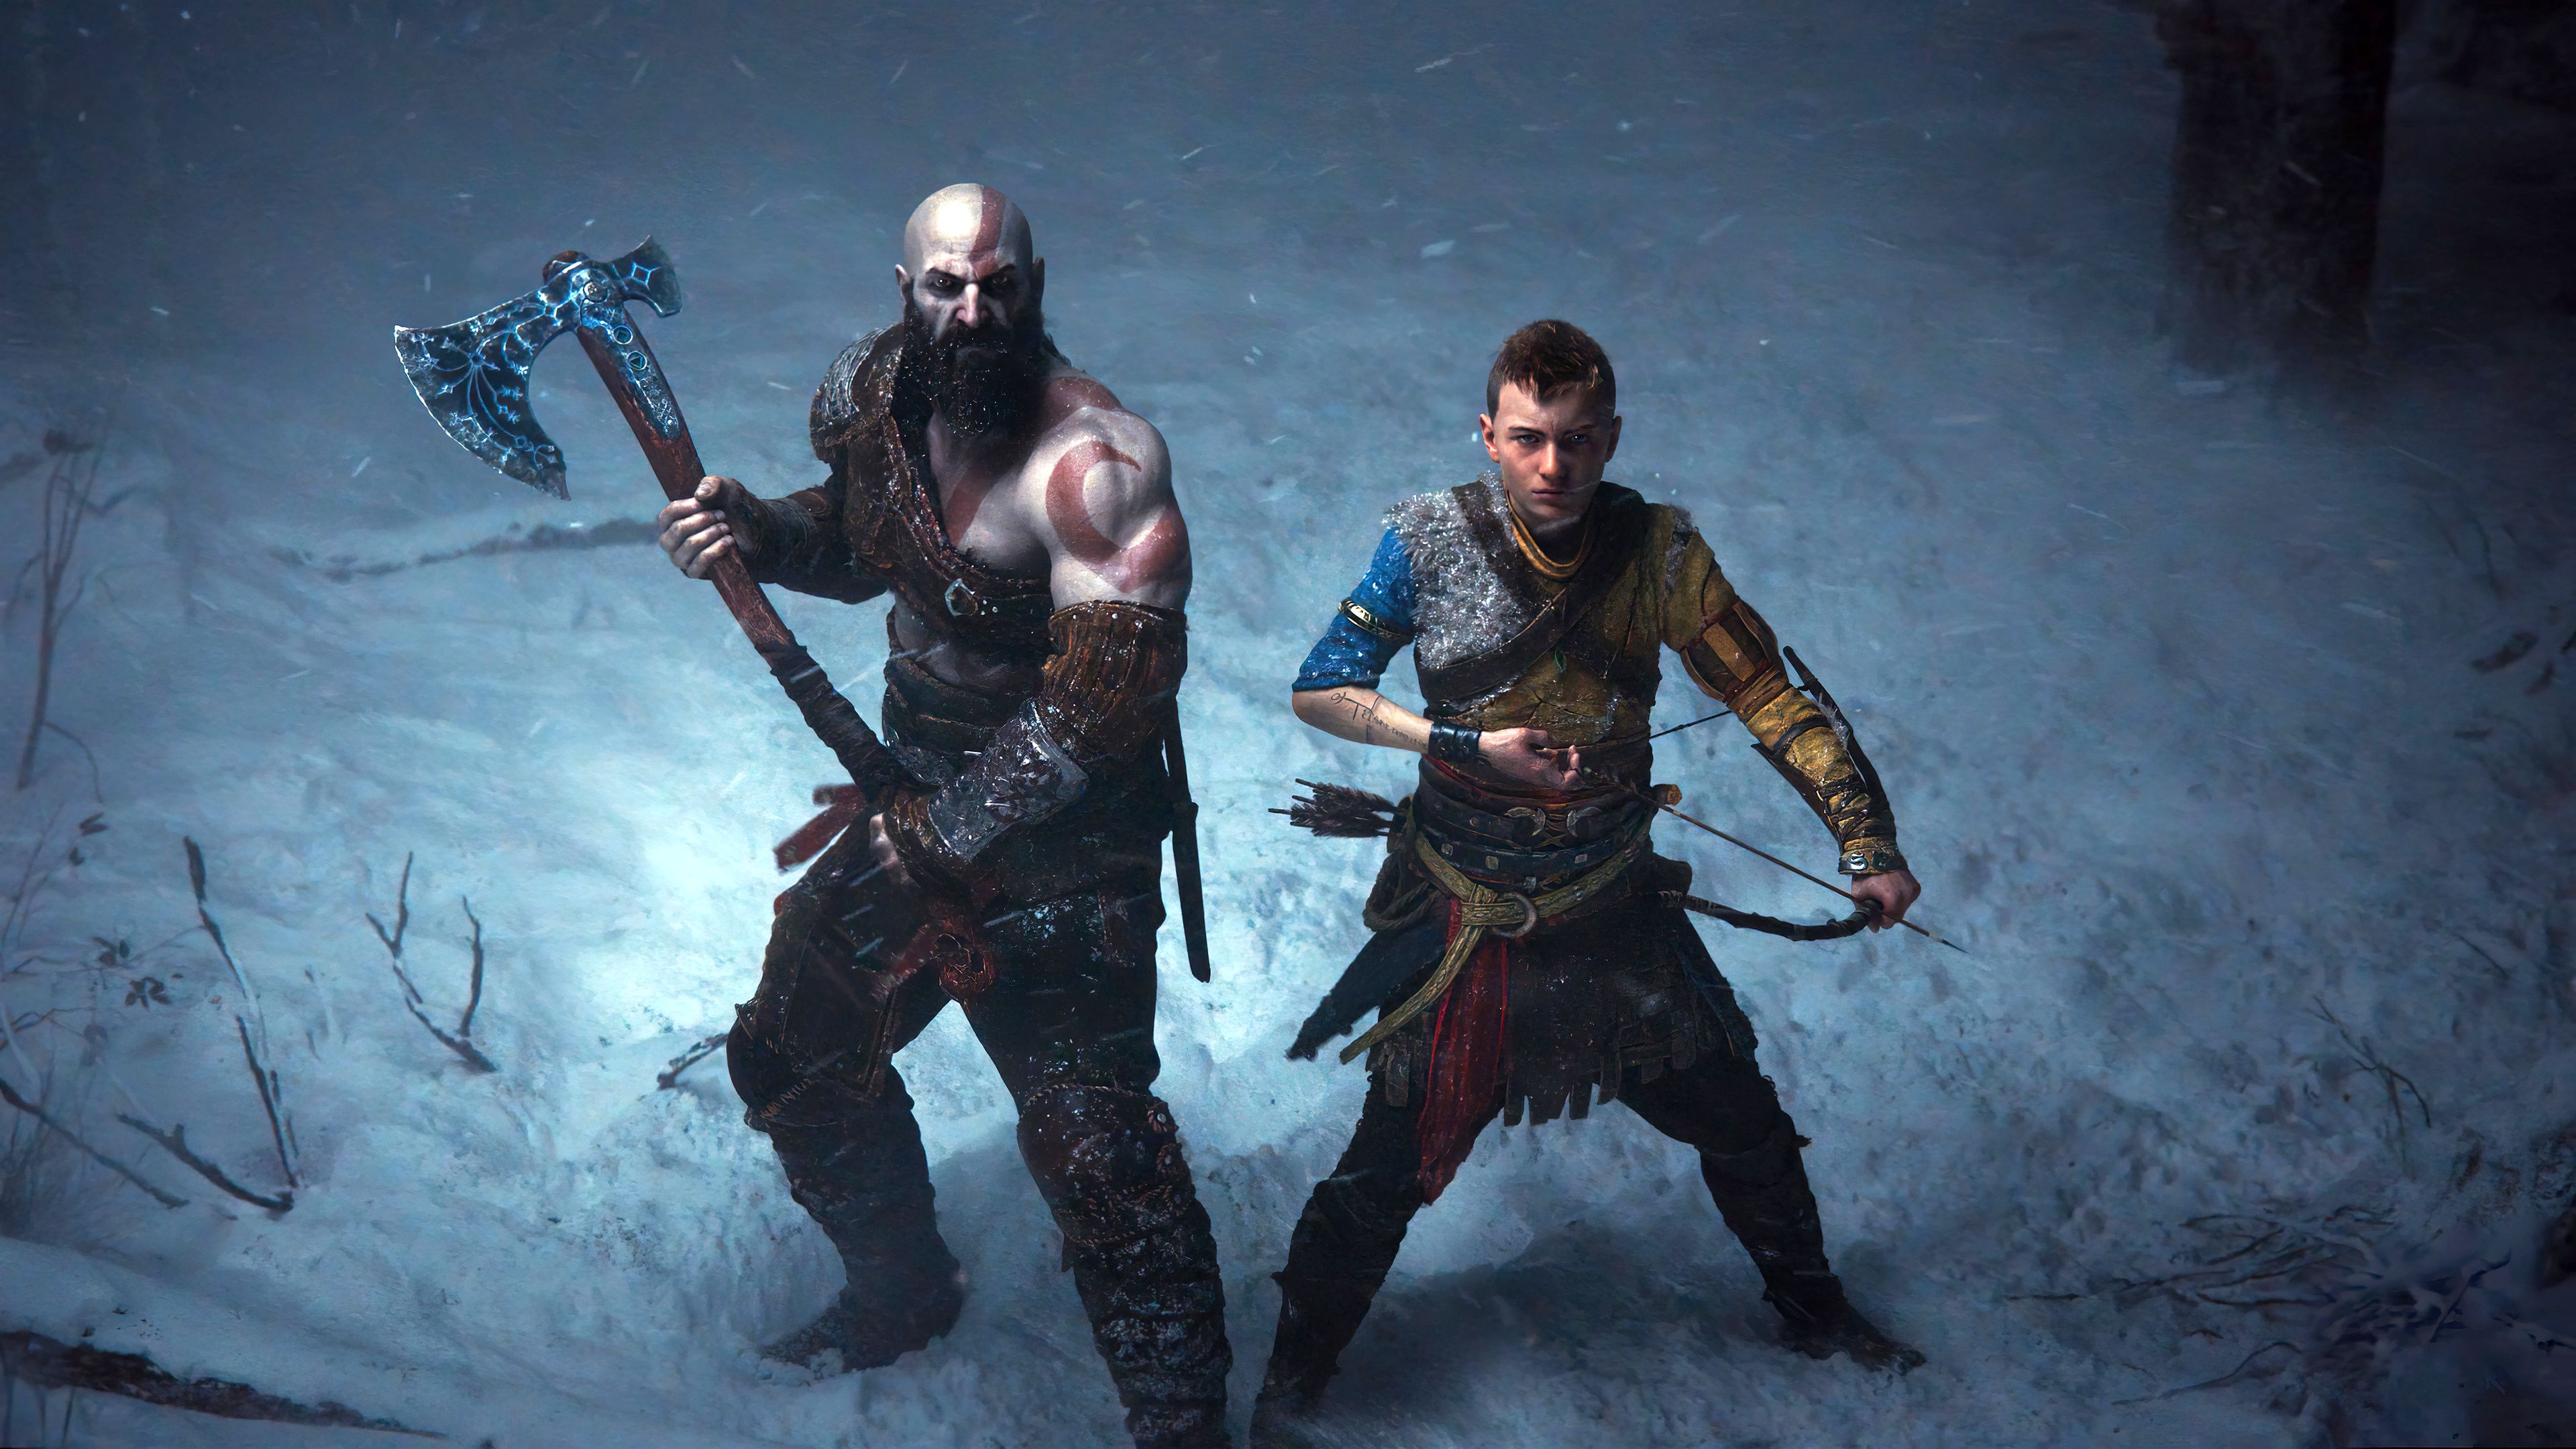 Elden Ring won GOTY at the 26th Annual DICE Awards, but God of War: Ragnarok took home more gongs